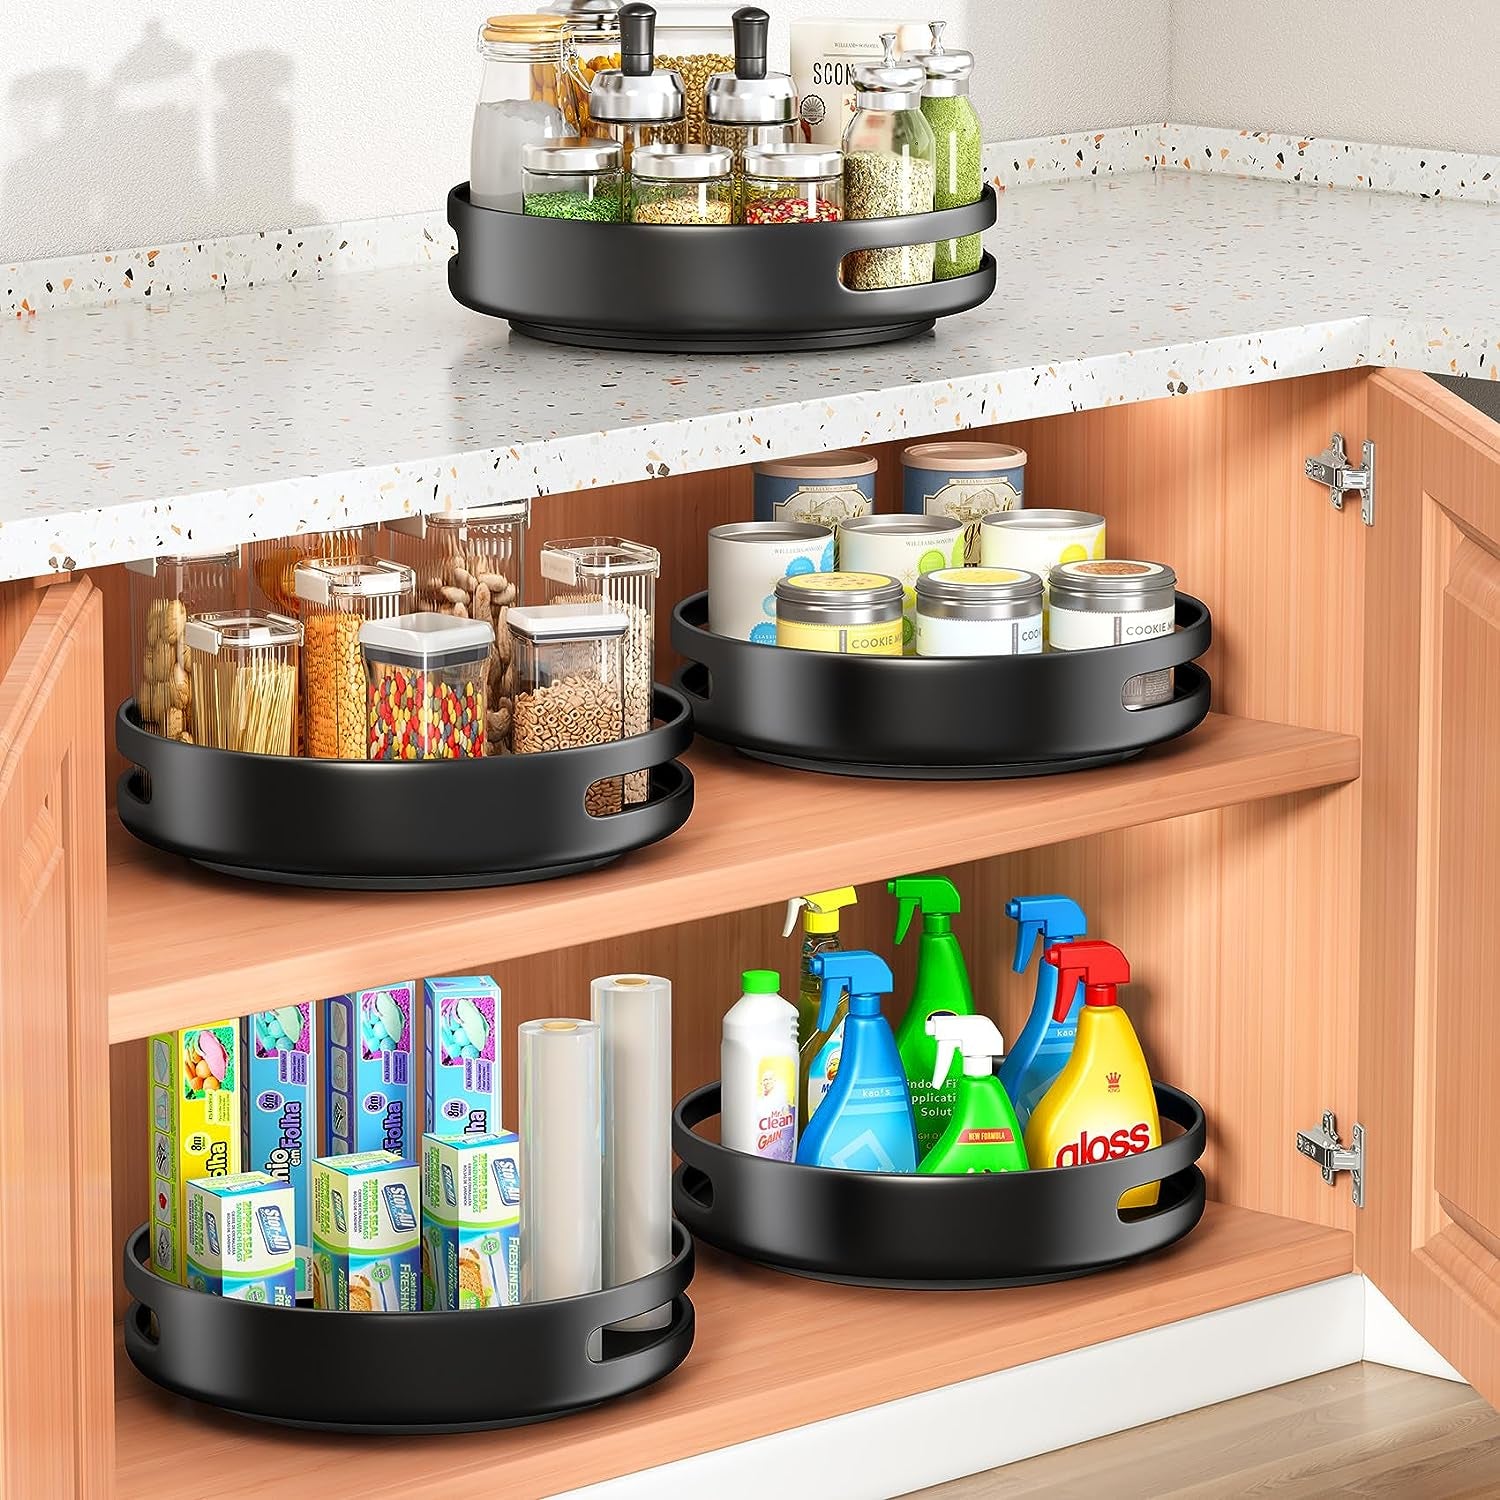 Lazy Susan Turntable Organizer Rotating Spice Rack - 10 Inch Metal Lazy Susan Rack for Cabinet, Kitchen Organizers and Storage for Counter Refrigerator Pantry Cupboard, Black